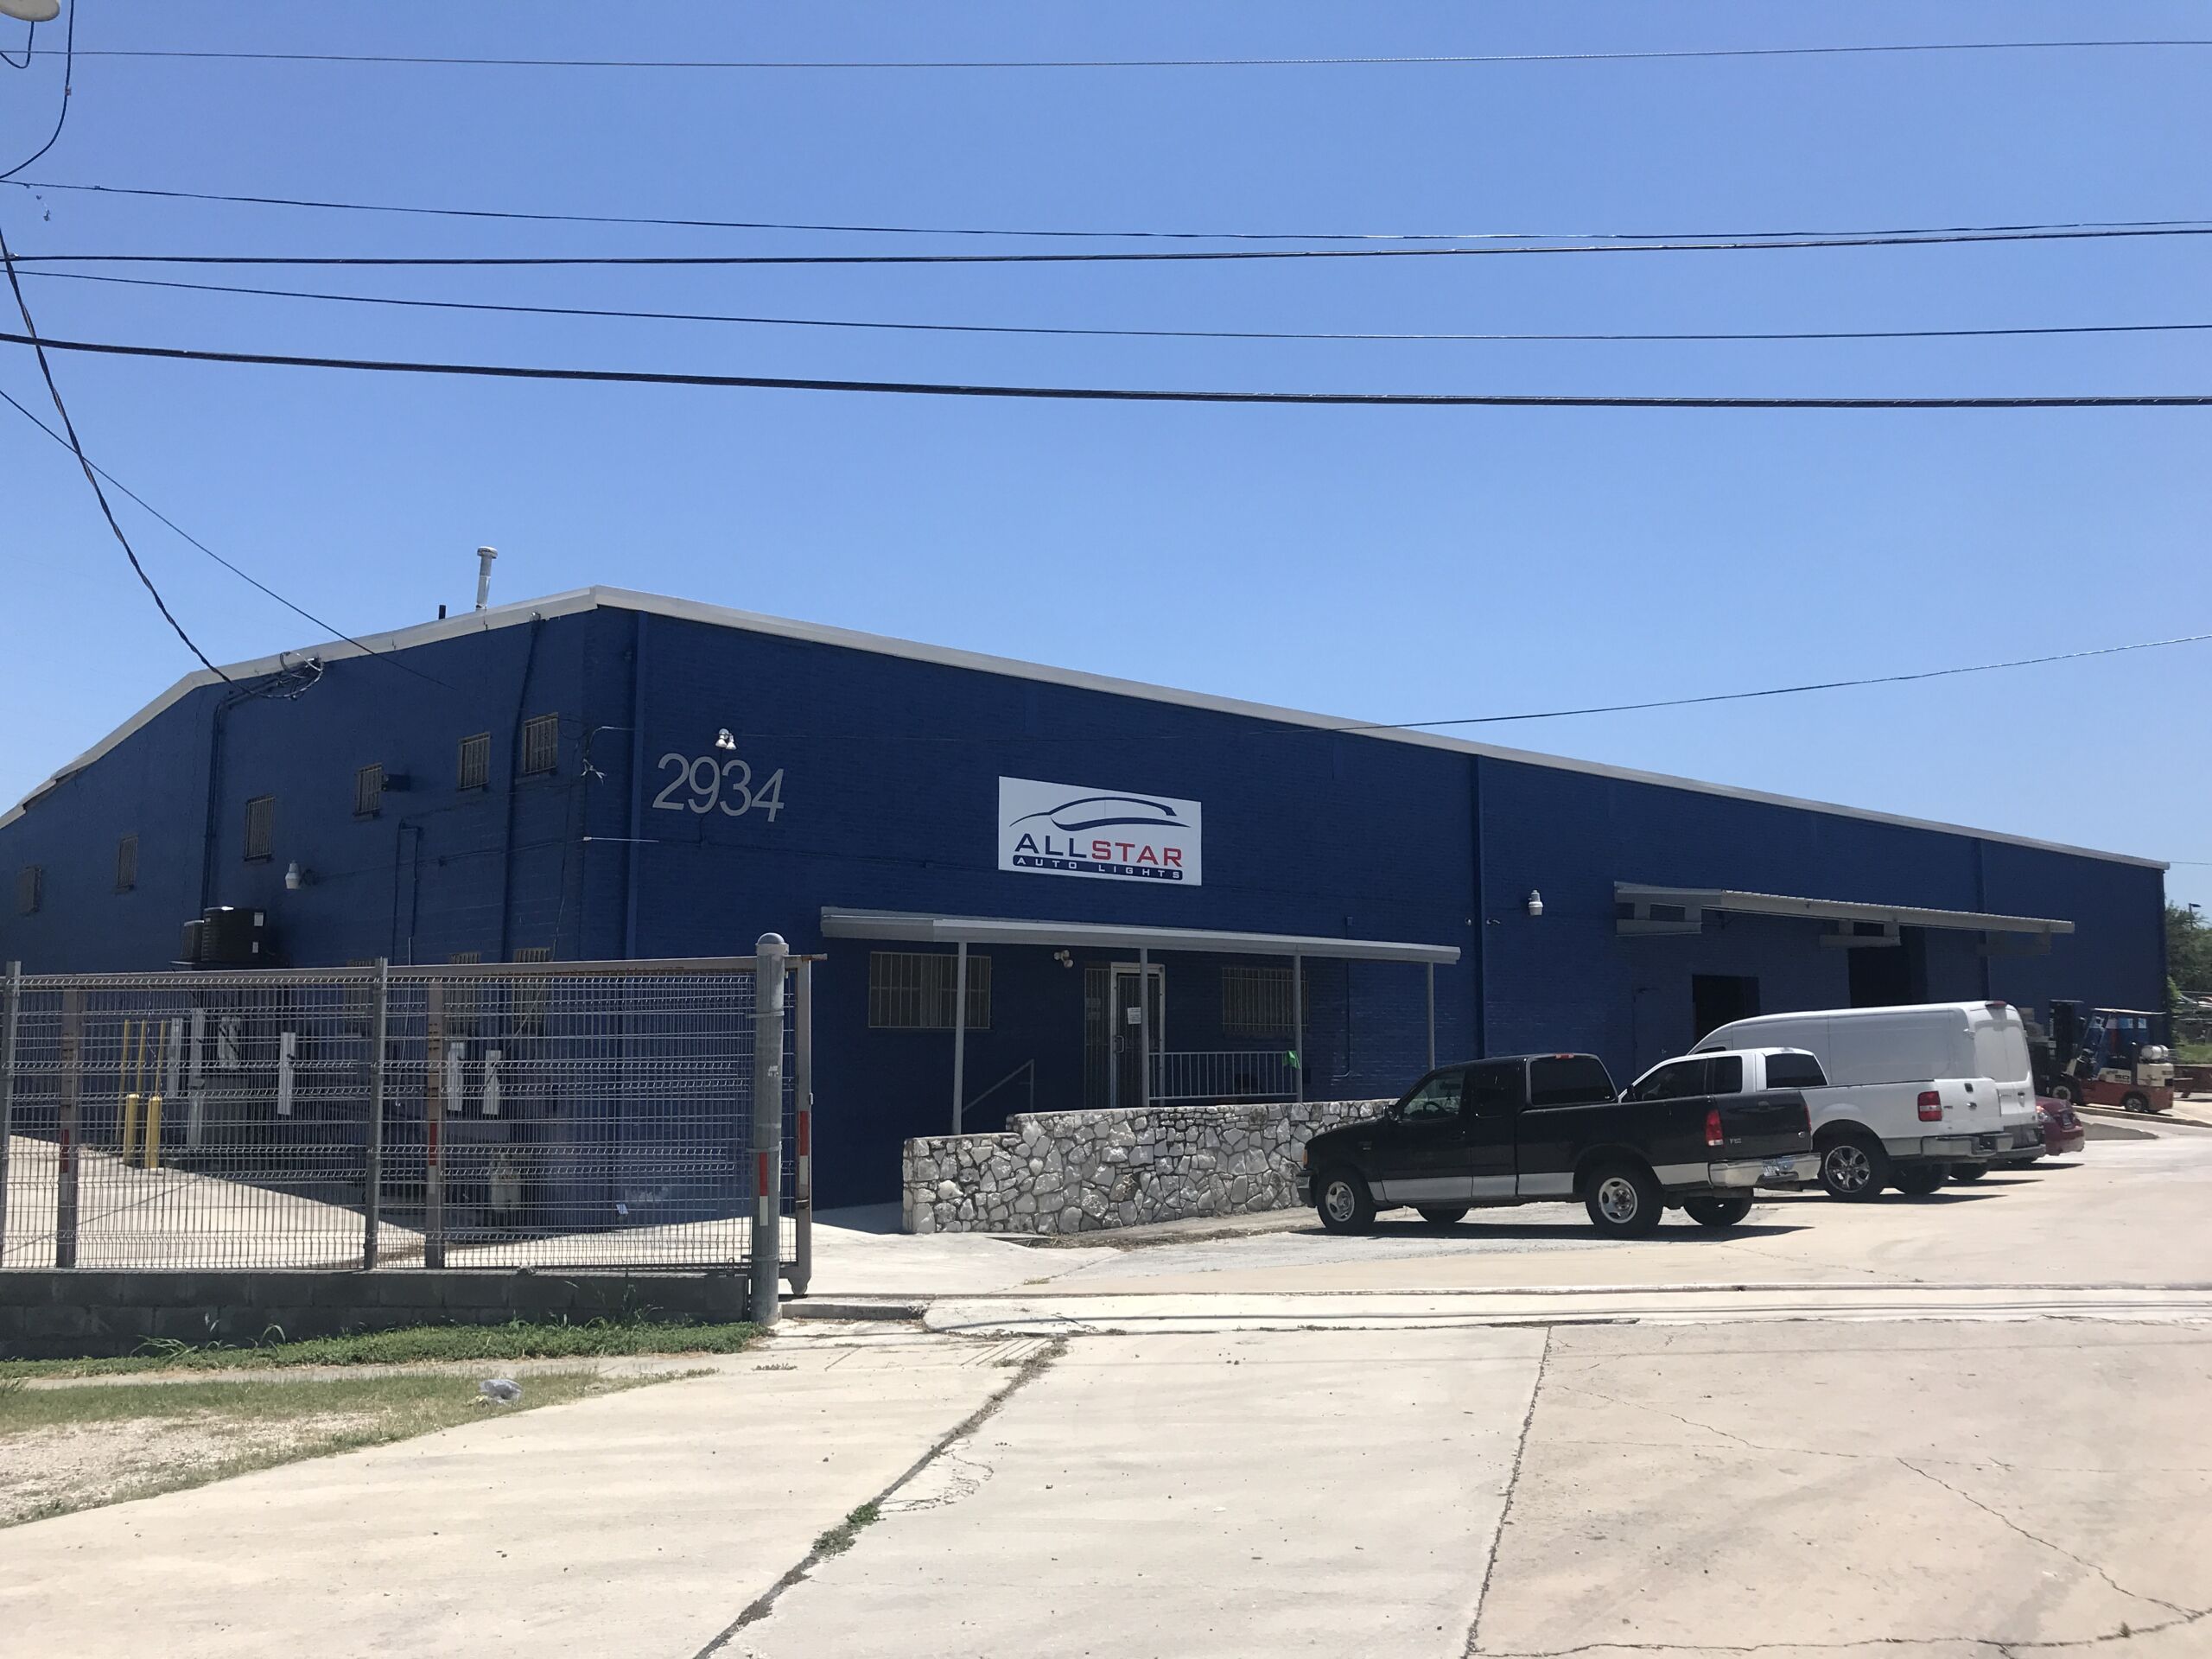 Obsido Commercial arranges lease of 16,000 SF Industrial property